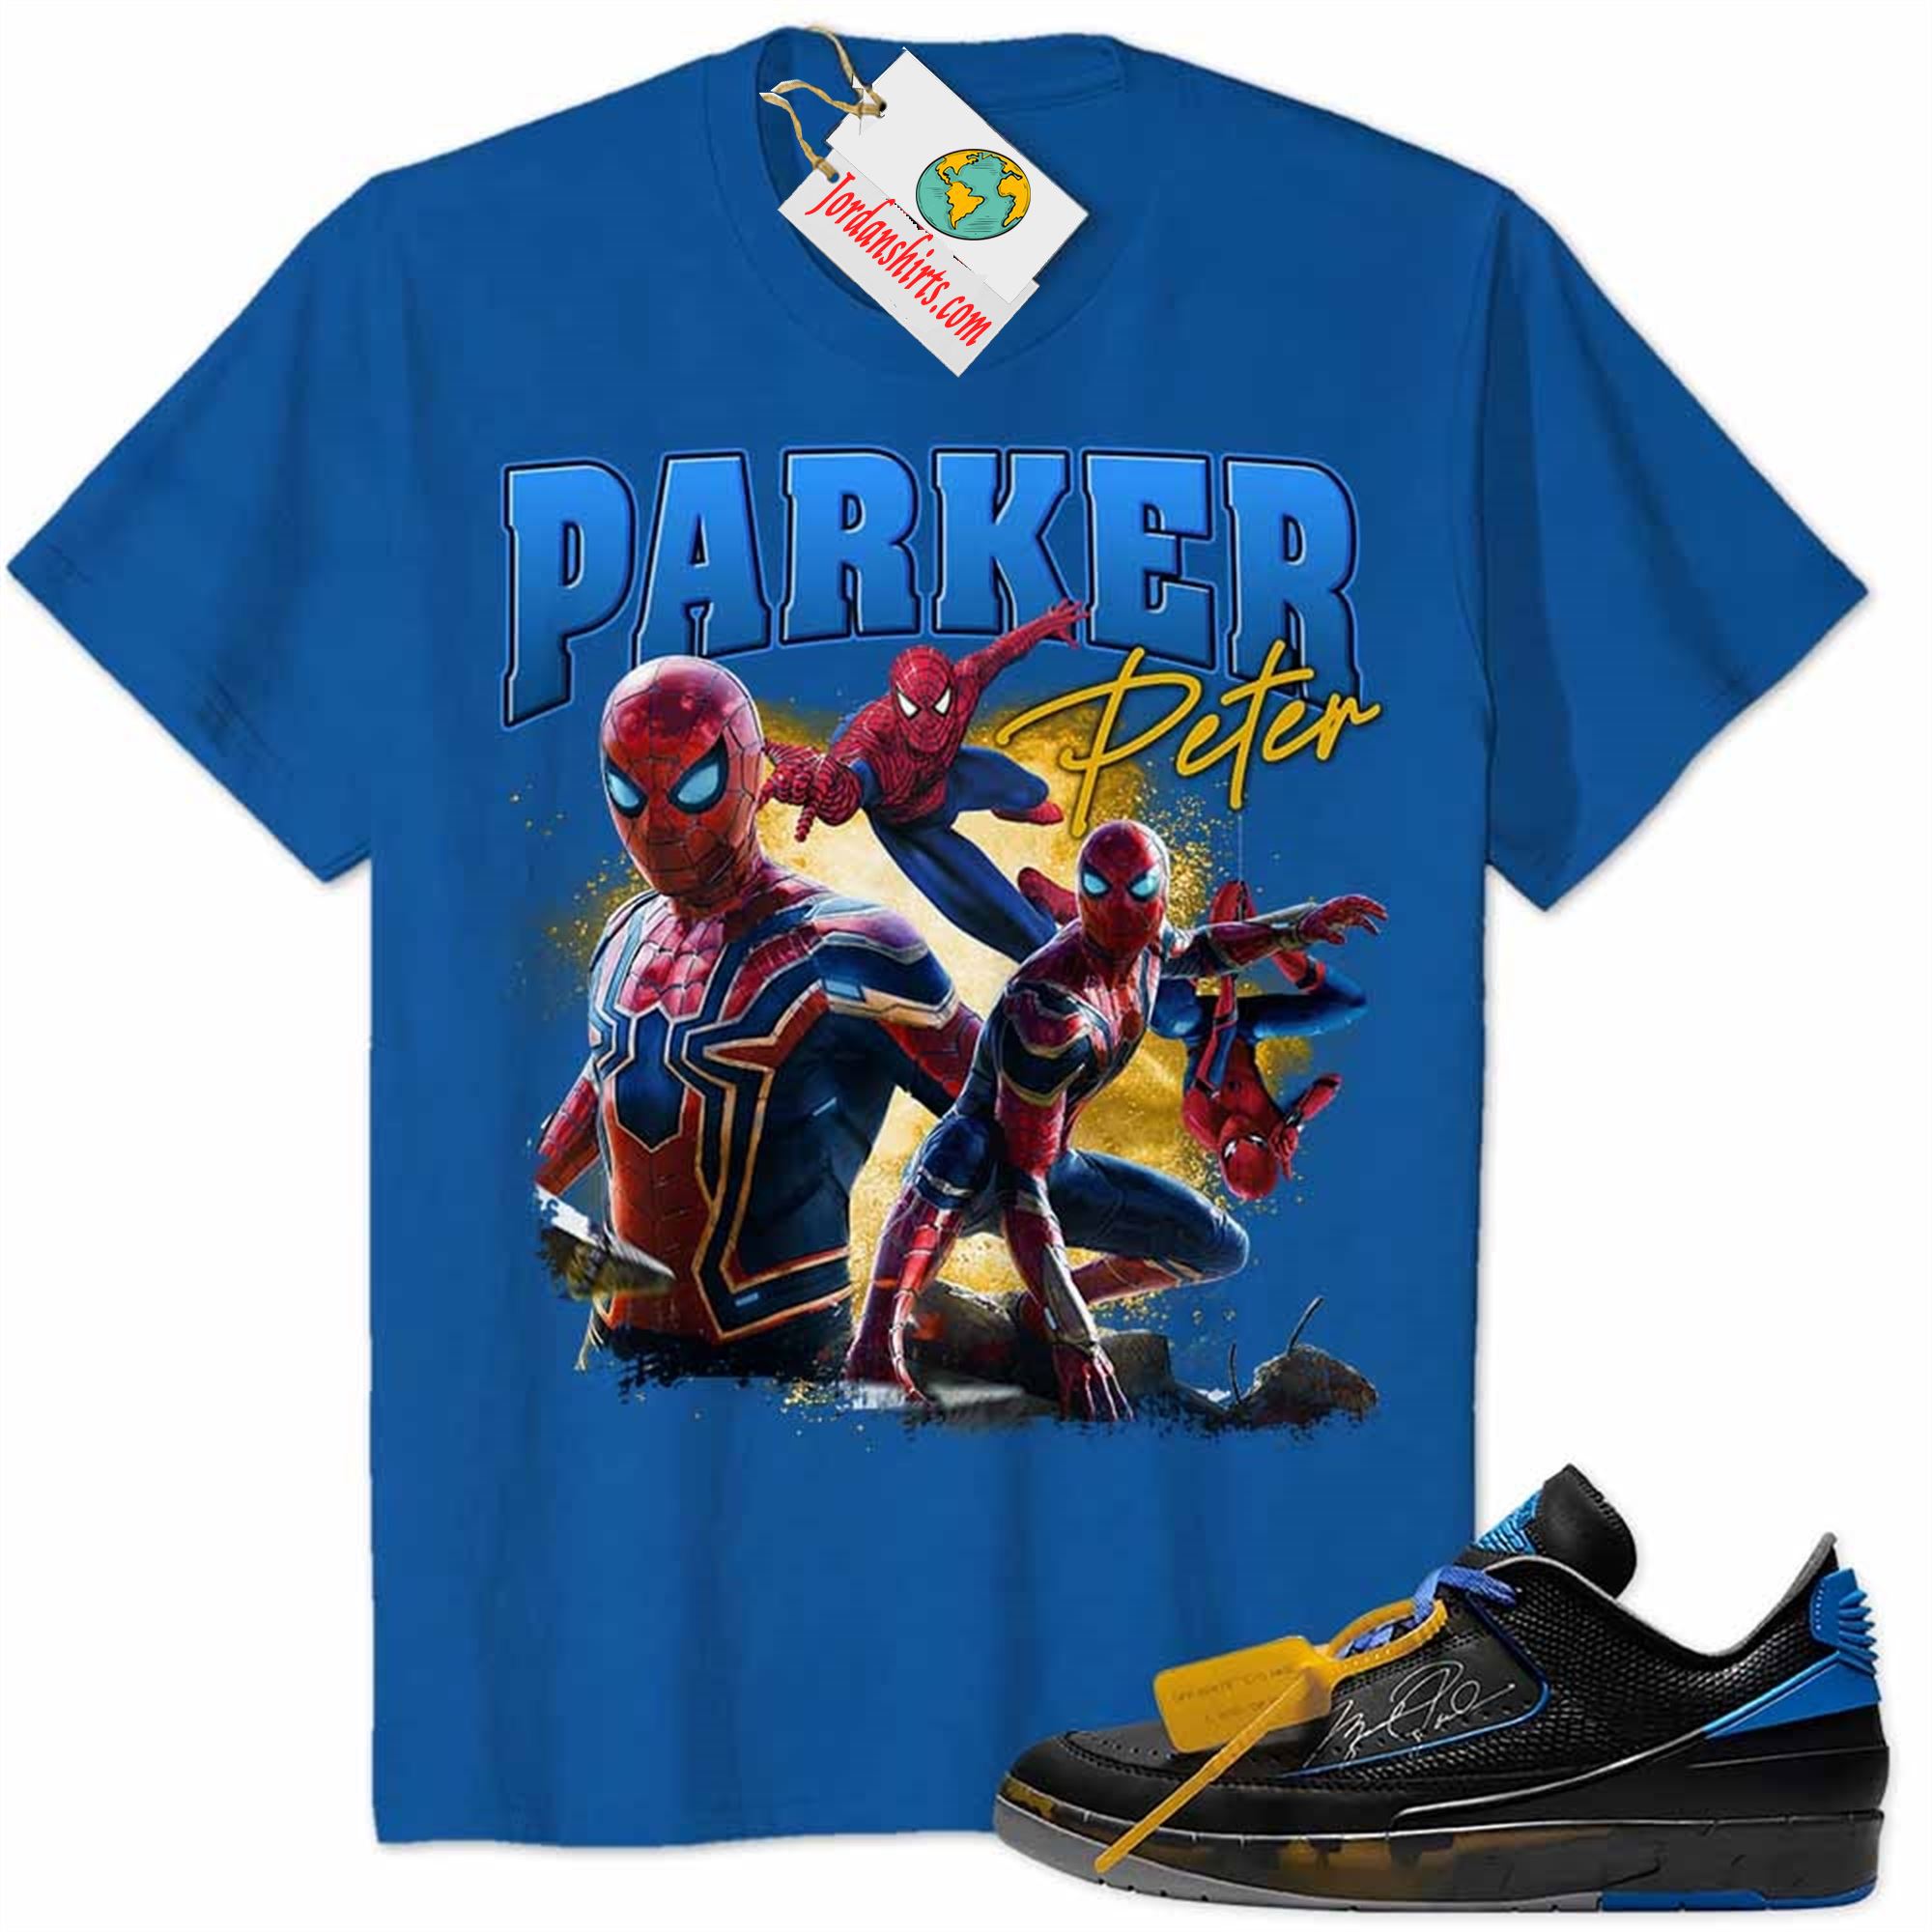 Jordan 2 Shirt, Peter Parker Tom Holland Spider-man No Way Home From Marvel Blue Air Jordan 2 Low X Off-white Black And Varsity Royal 2s Full Size Up To 5xl